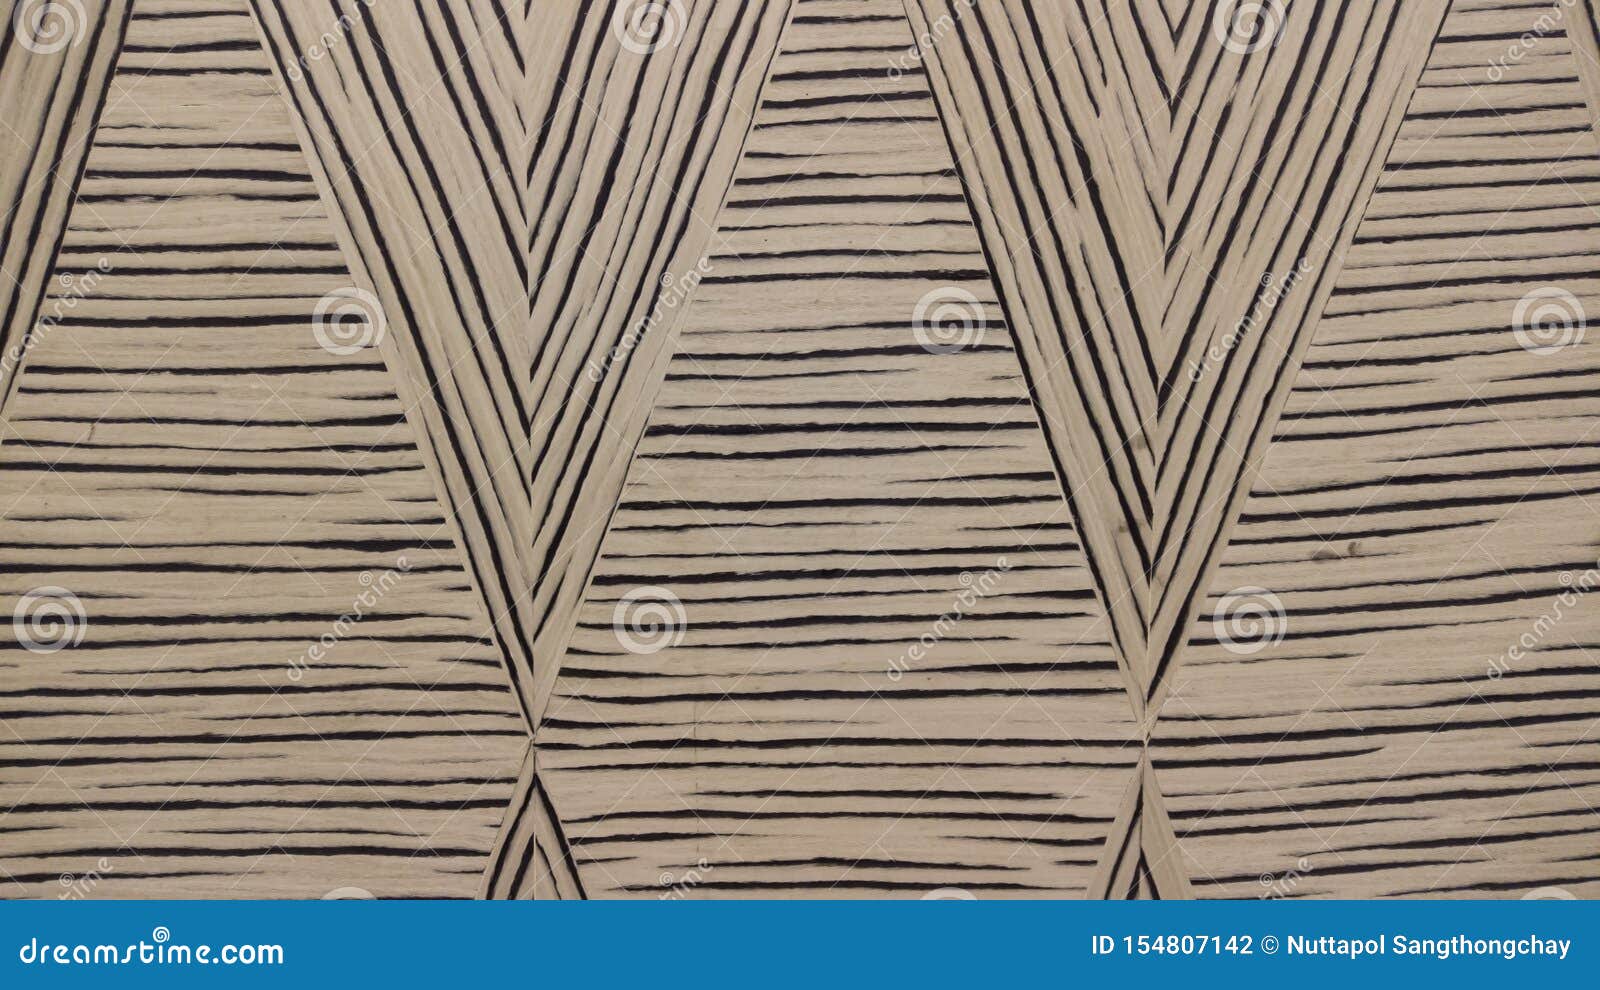 Zebrano Wood Texture In Design Pattern For Furniture Finishing